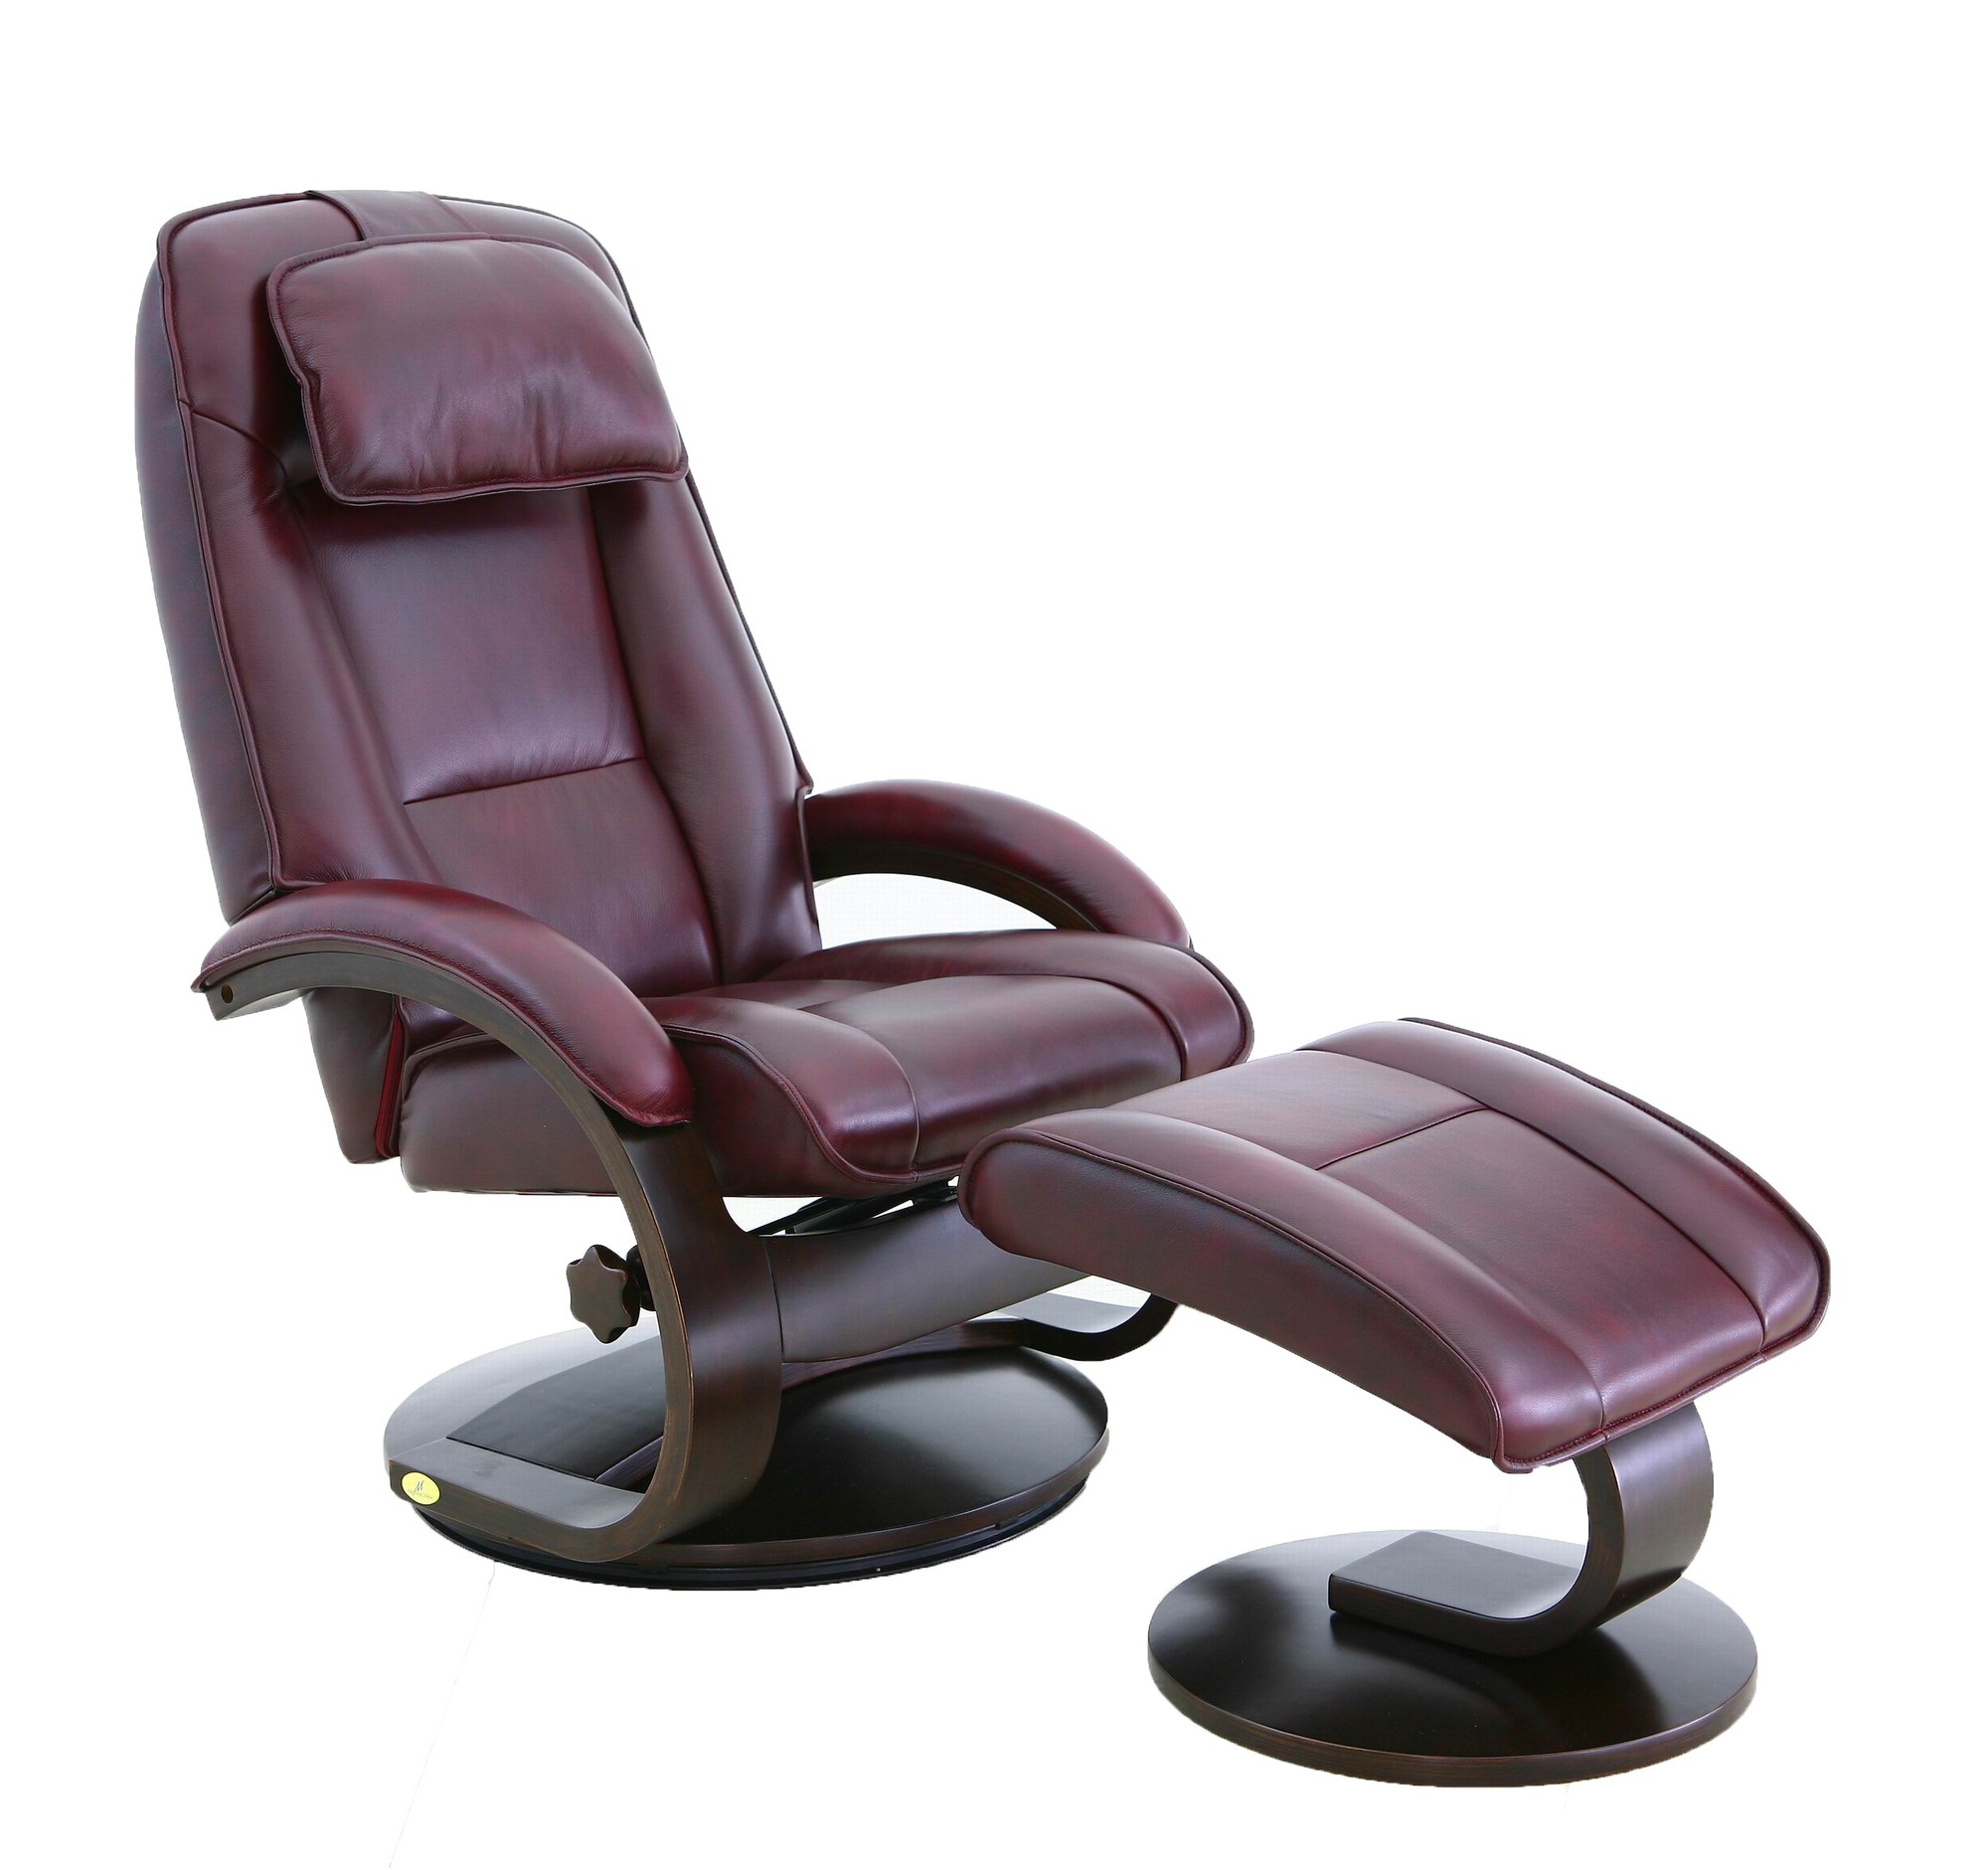 Burgundy Fabric Recliner chair and Ottoman Set